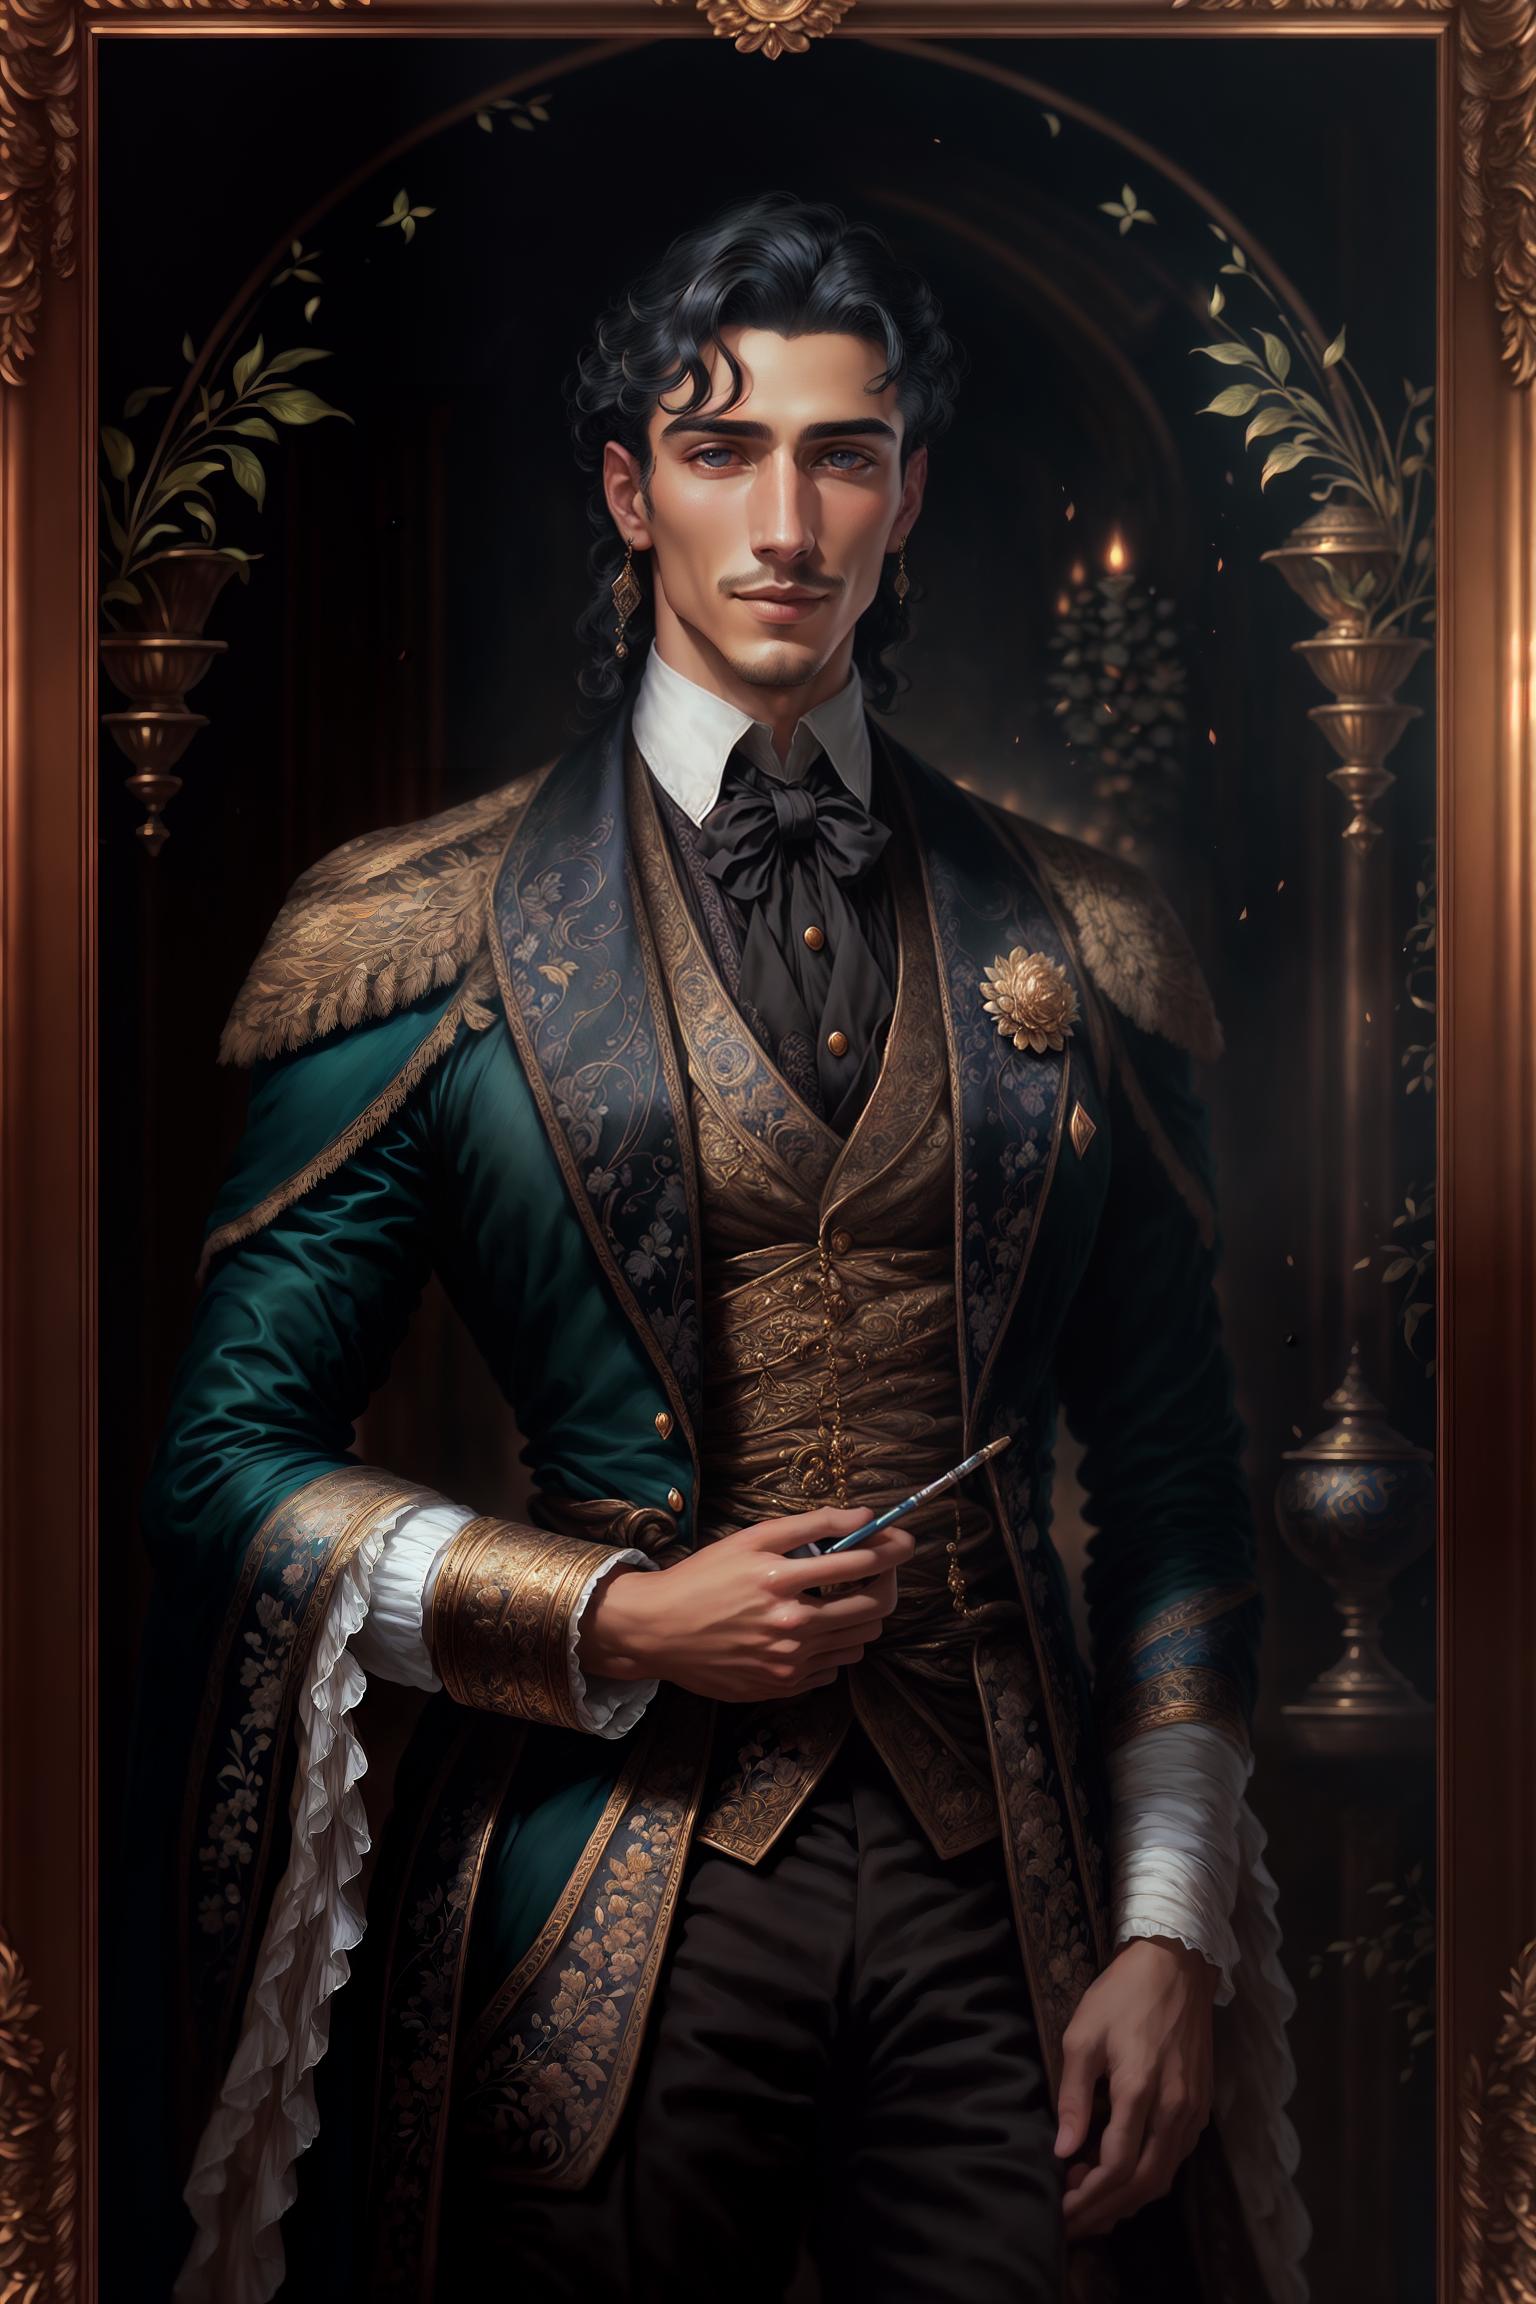  Dorian, (eternal youth:1.2), (appears young, handsome, and full of vitality), (thick hair), (bright eyes), (flawless complexion), (elegant noble:1.0), (as a character in a portrait), (bestows an aristocratic or artistic demeanor), (wearing vintage and gorgeous attire), (holding a paintbrush), (mysterious smile:1.0), (displaying a mysterious and slightly seductive smile), (increasing his allure to draw viewers into the painting and absorb life force), (artwork frame:1.2), (Dorian is trapped within a portrait), (main background is the exquisite and ancient art style frame), (classic painting background:1.0), (referencing classic oil painting styles), (tranquil fields), (castle gardens), (luxurious banquet halls), (symbol of passing time:0.8), hyperrealistic, full body, detailed clothing, highly detailed, cinematic lighting, stunningly beautiful, intricate, sharp focus, f/1. 8, 85mm, (centered image composition), (professionally color graded), ((bright soft diffused light)), volumetric fog, trending on instagram, trending on tumblr, HDR 4K, 8K